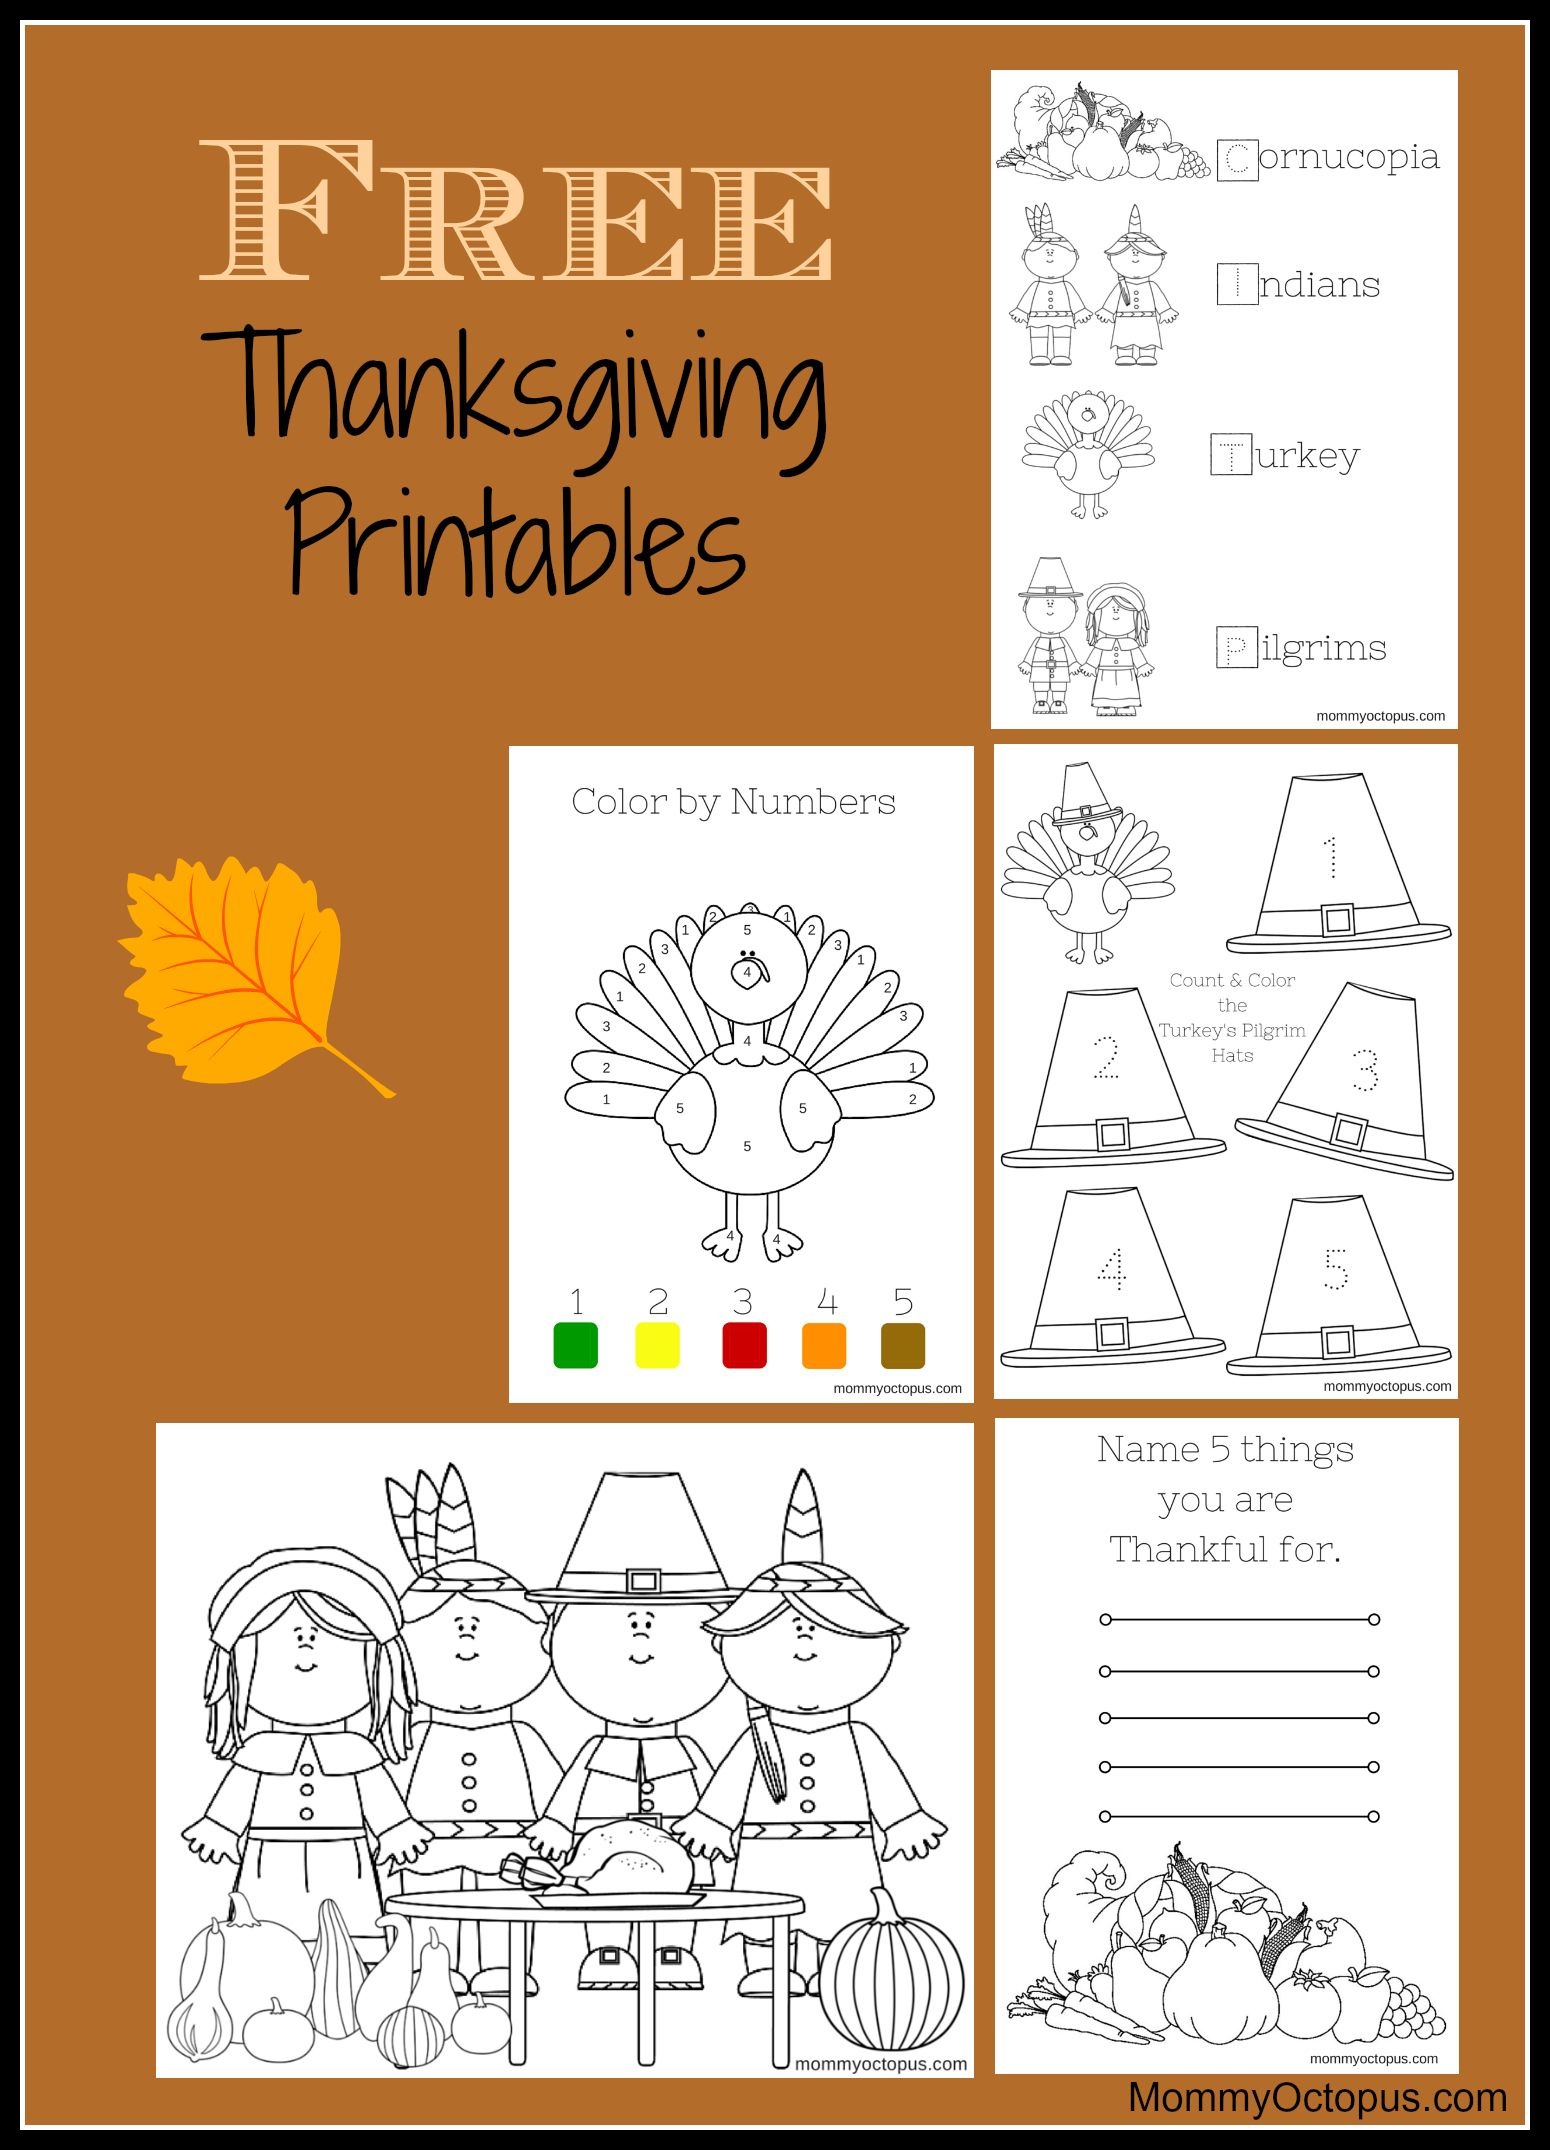 Free Thanksgiving Printable Activity Sheets! | Thanksgiving &amp; Fall - Free Printable Kindergarten Thanksgiving Activities